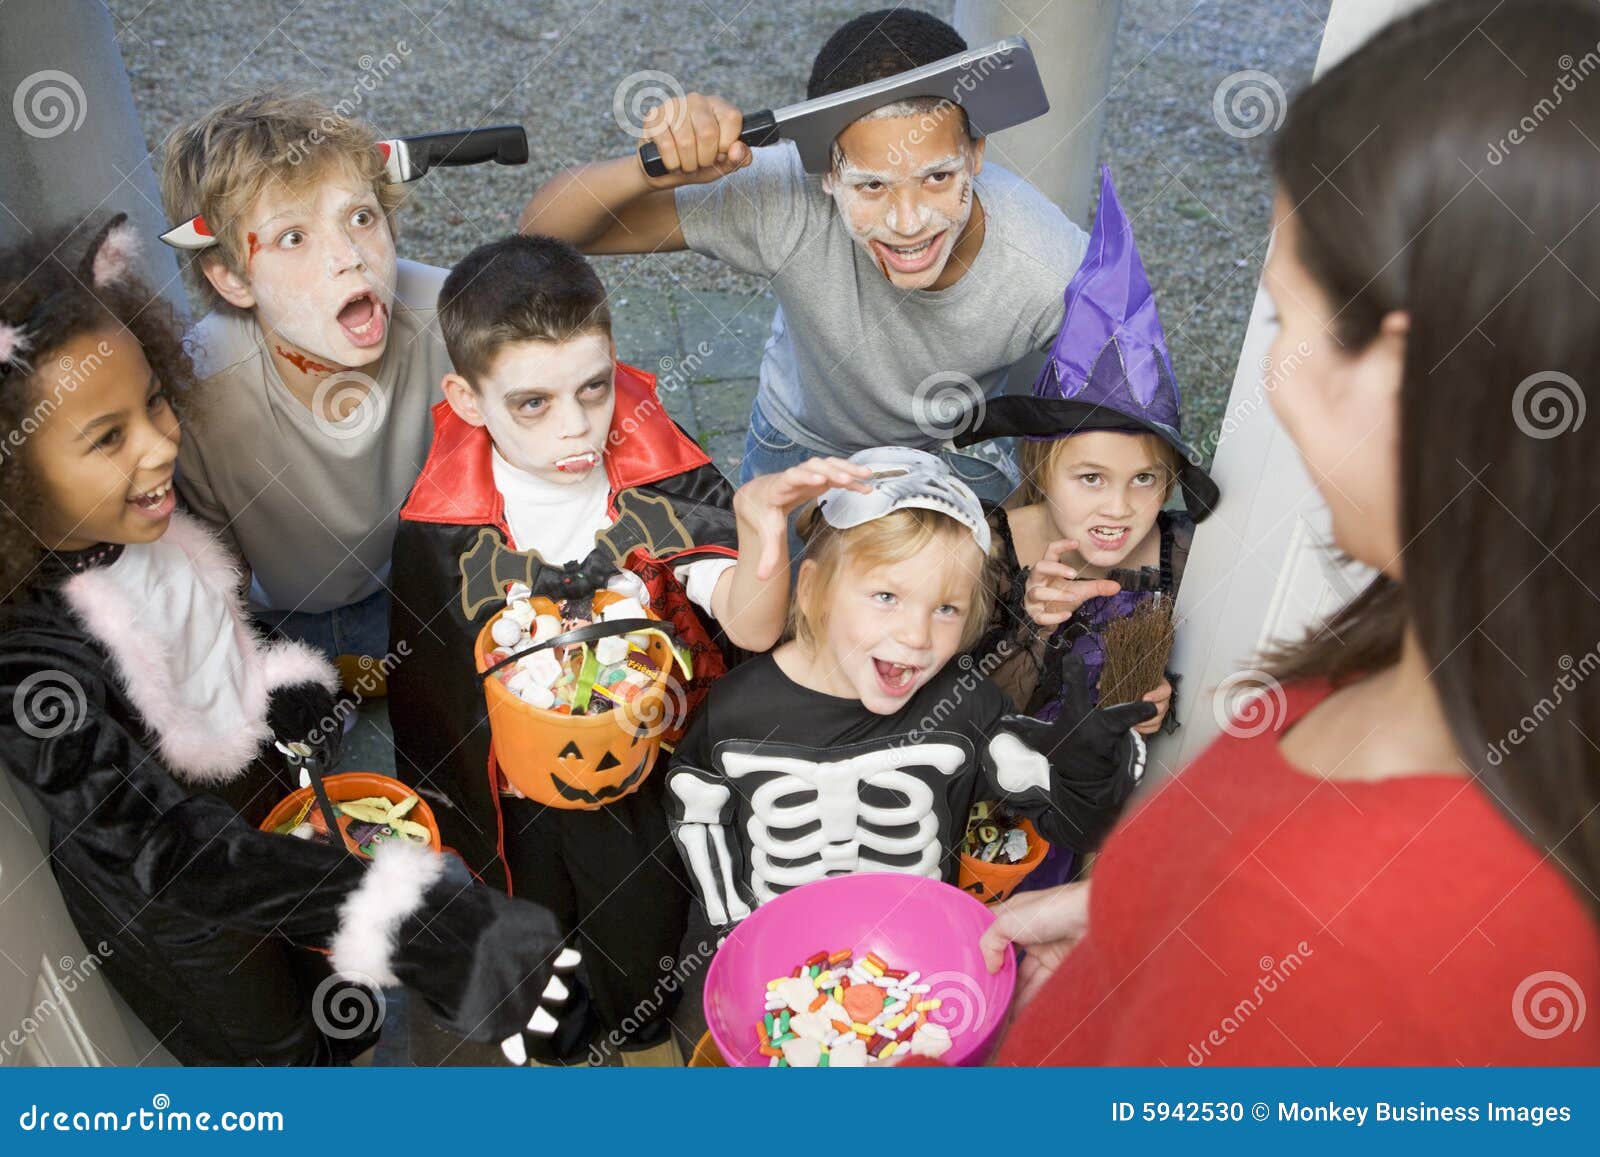 six children in costumes trick or treat at house